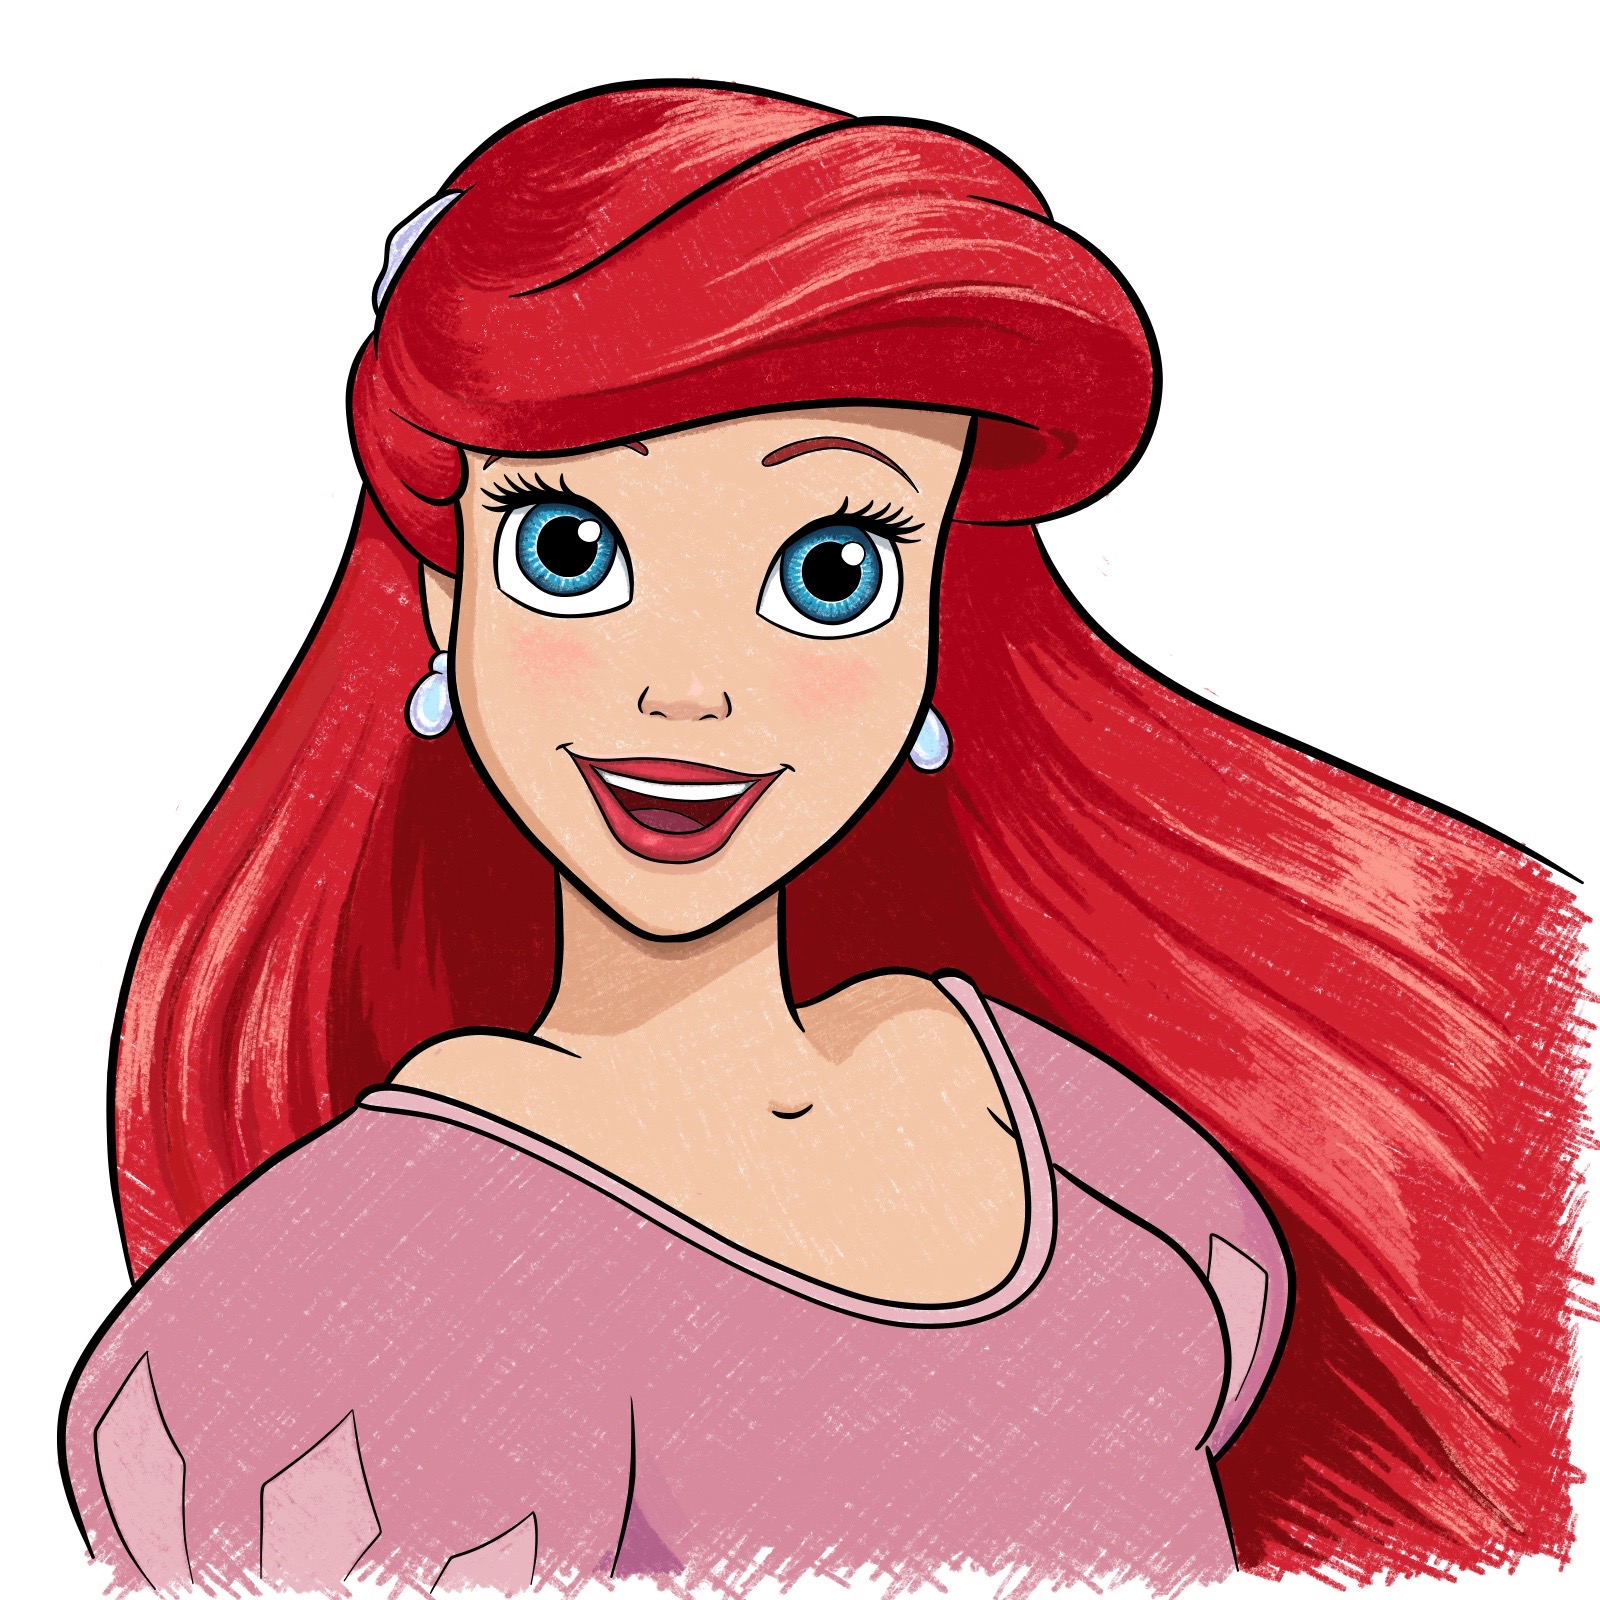 How to draw Ariel's face - The Little Mermaid - final step